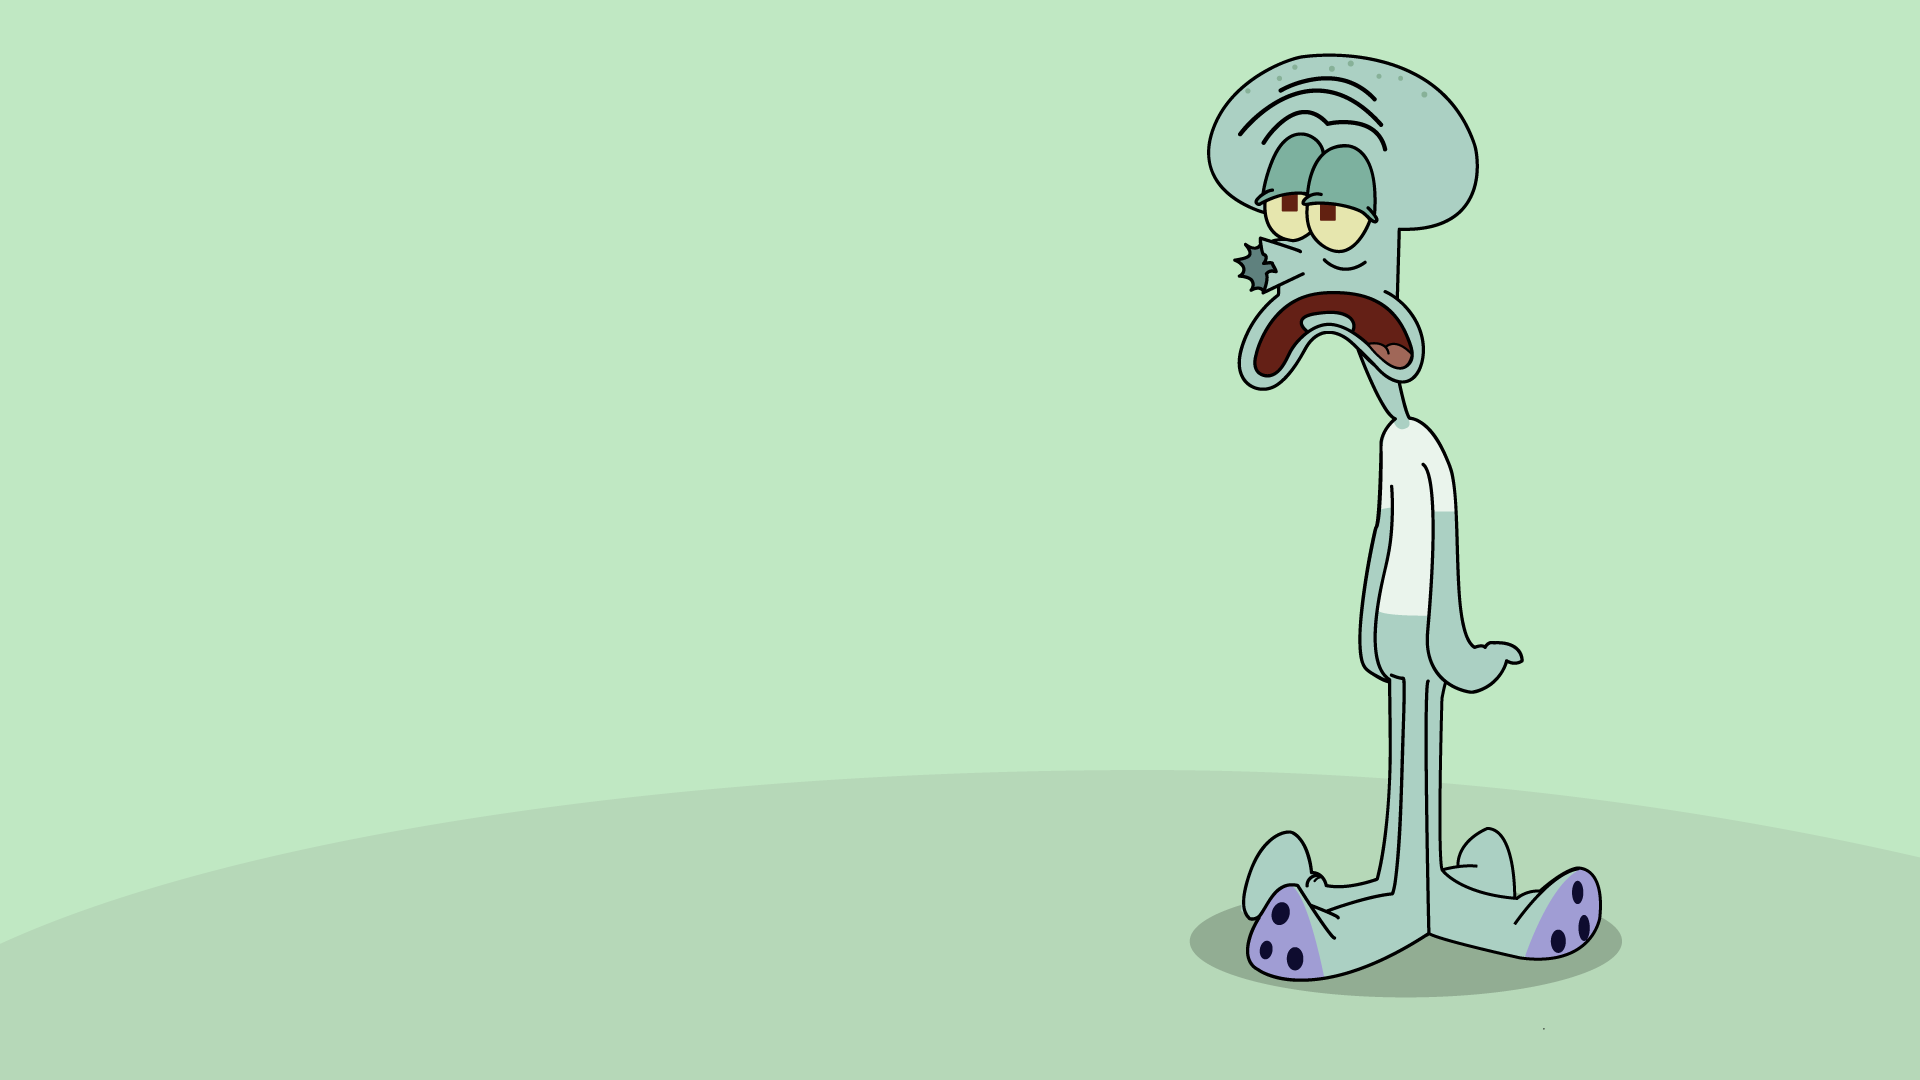 I Made This Squidward Wallpaper, What Do You Guys Think